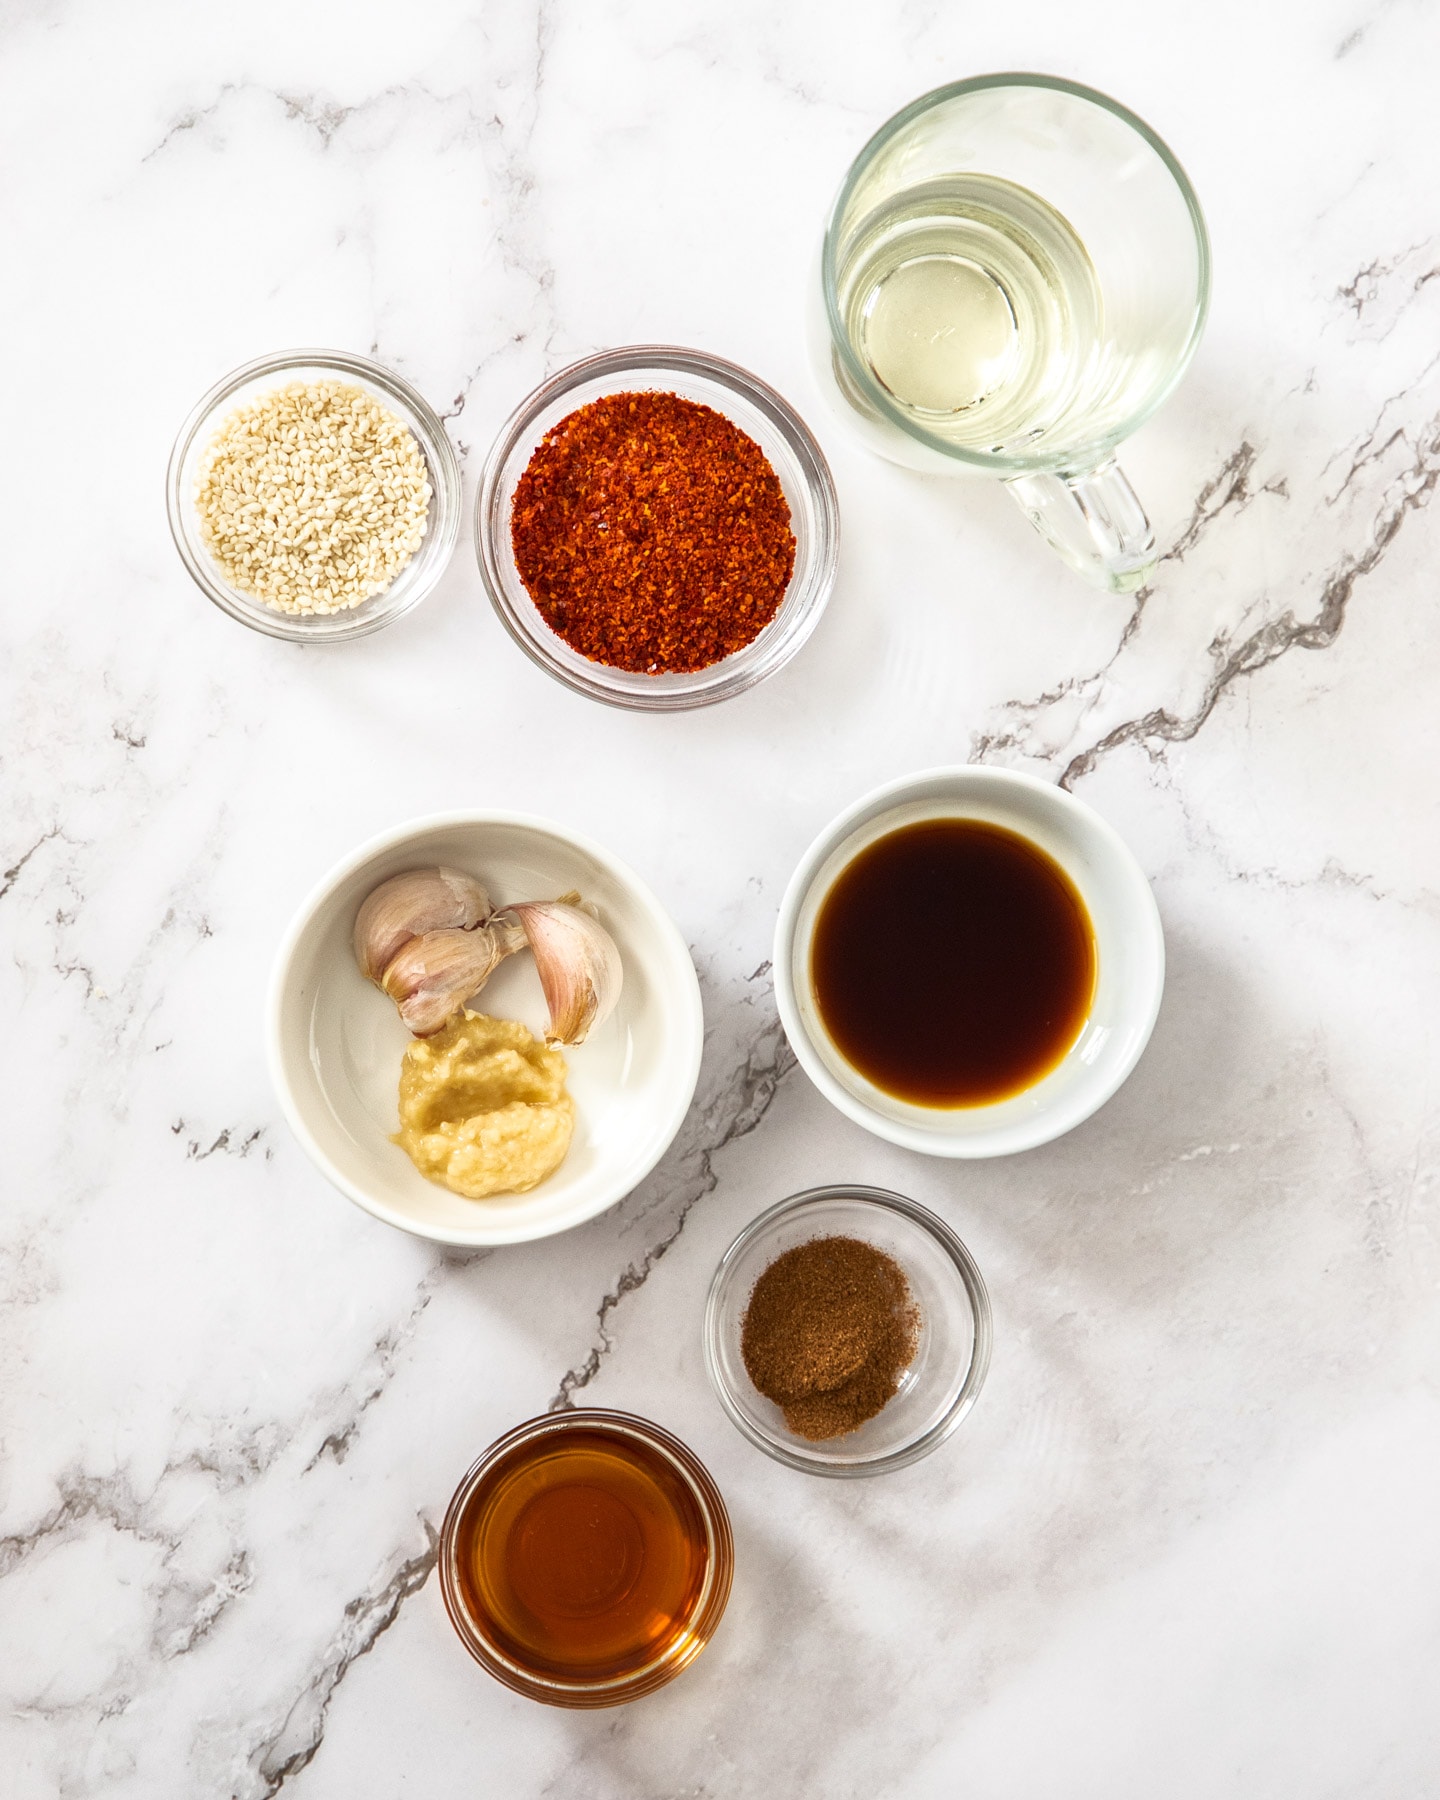 Ingredients for sesame chilli oil on a marble surface.